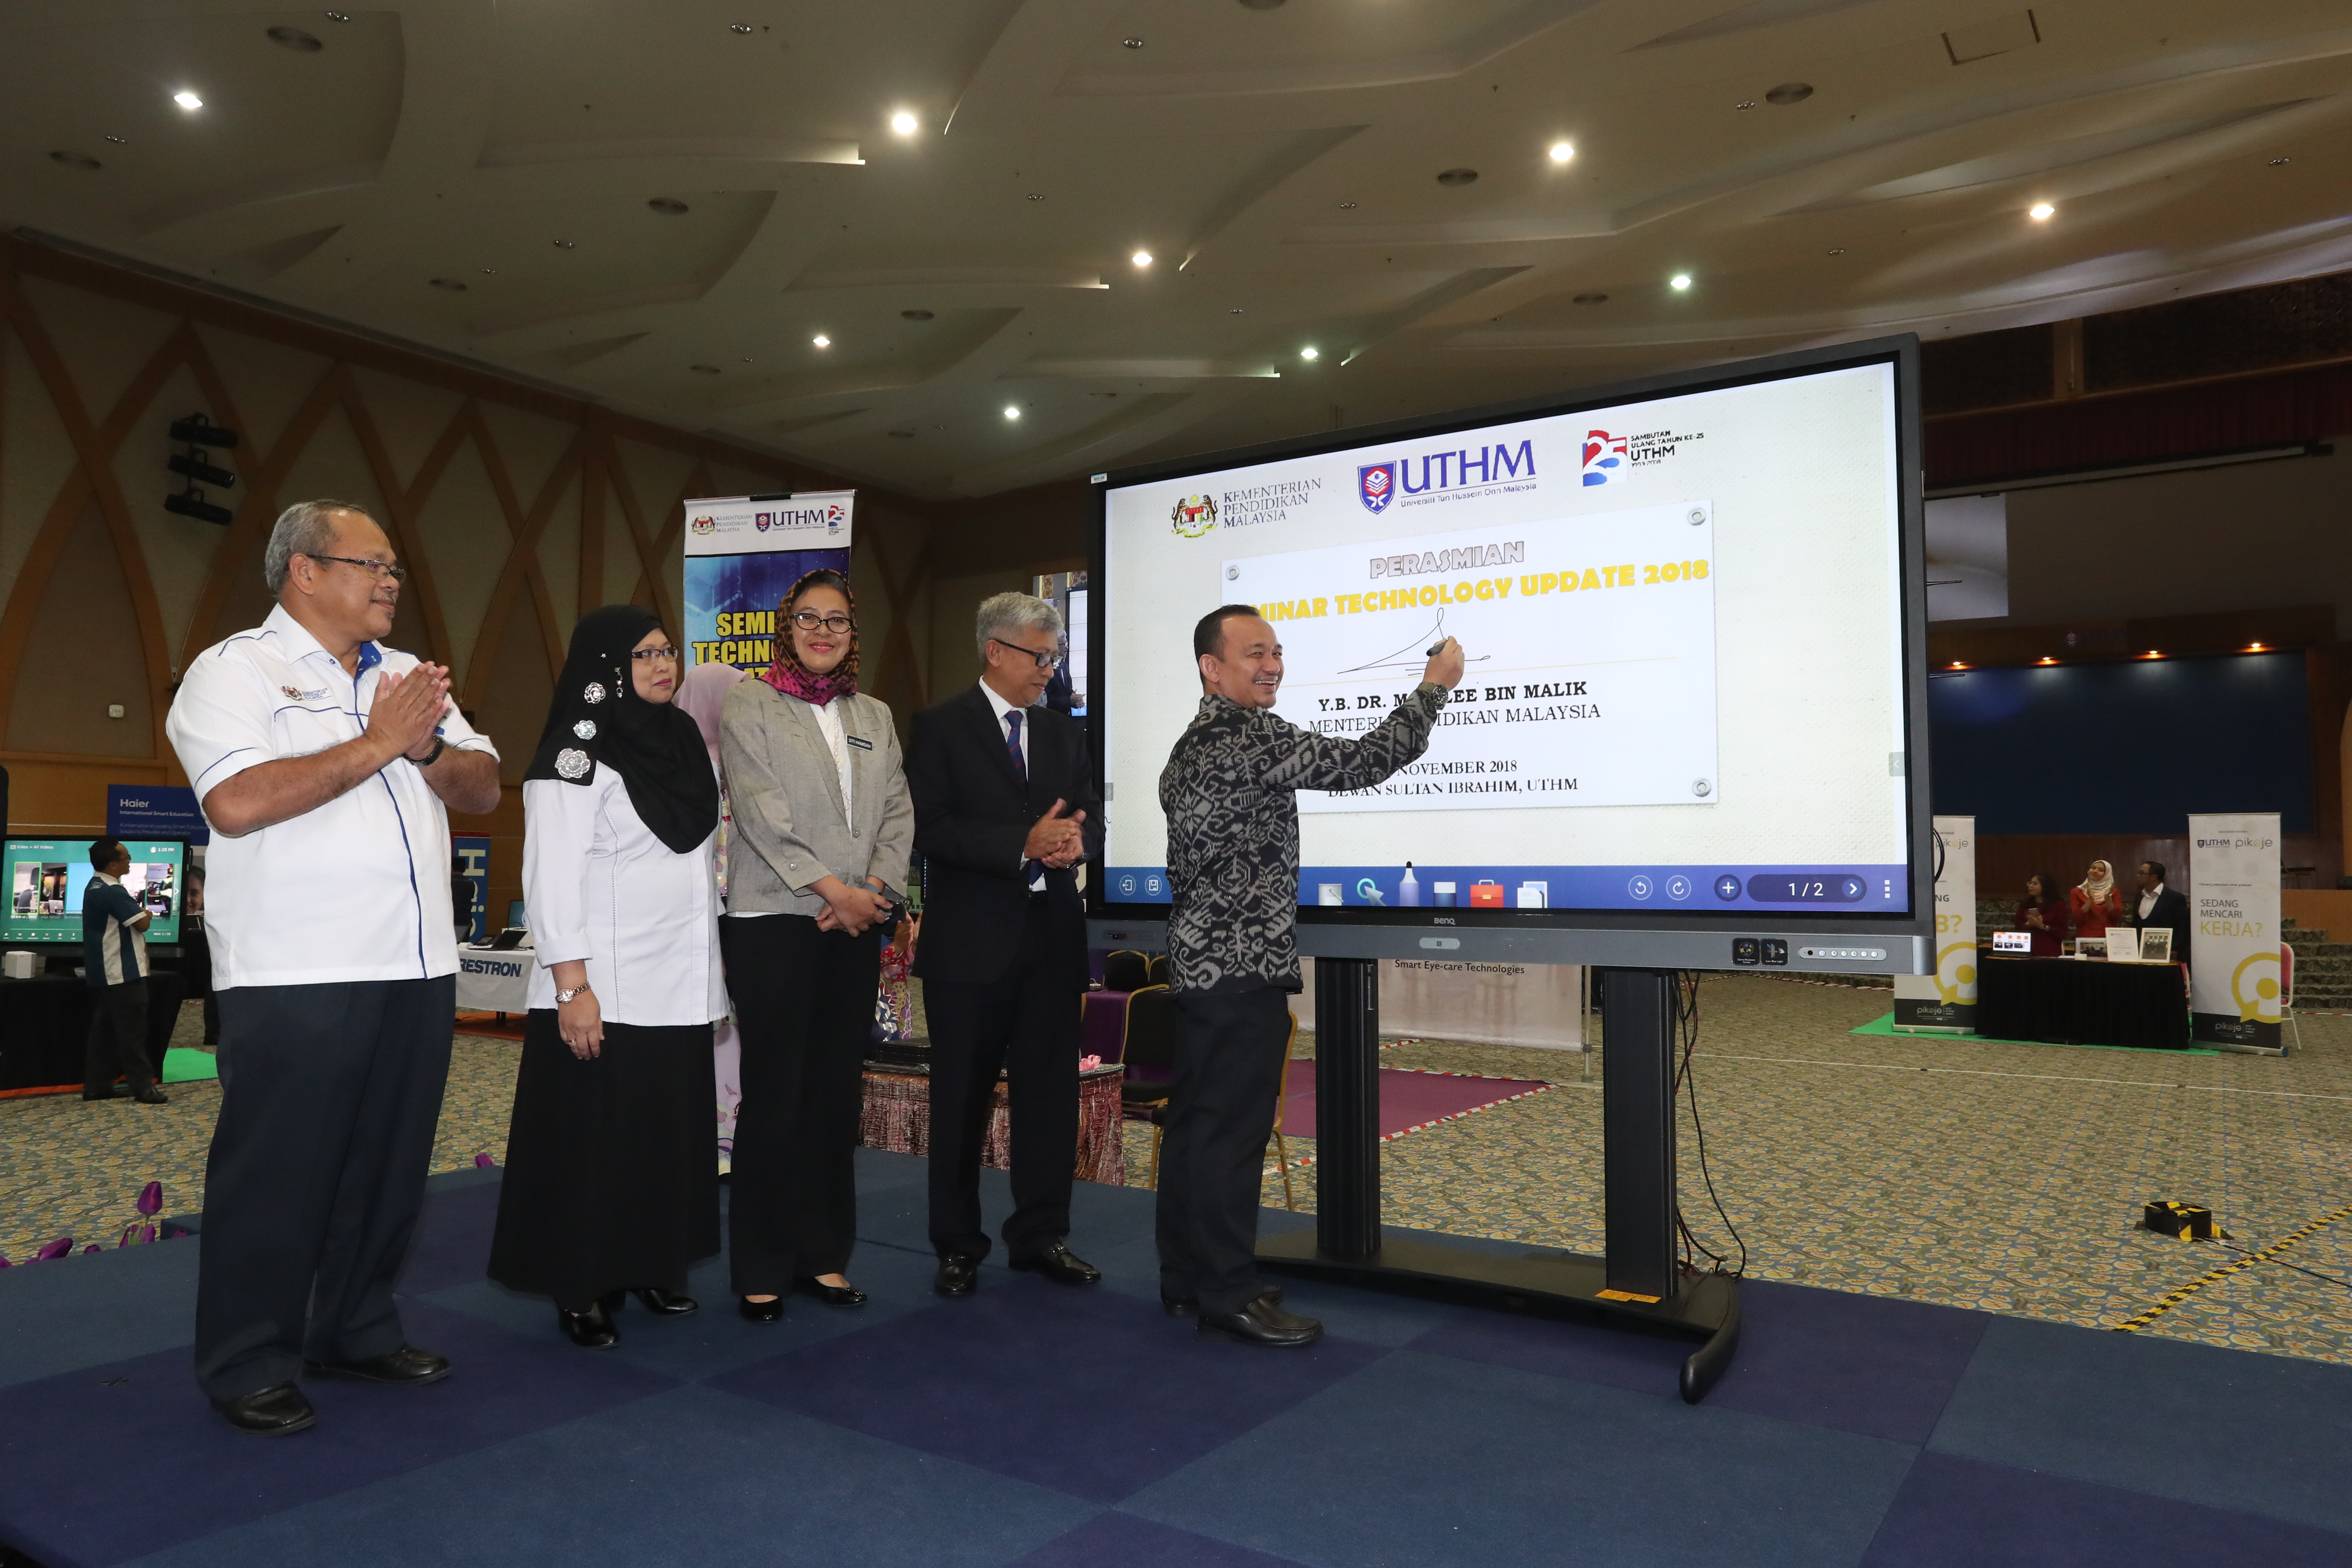 Minister of Education officiated Seminar Technology Update 2018 and launched MyRIVET